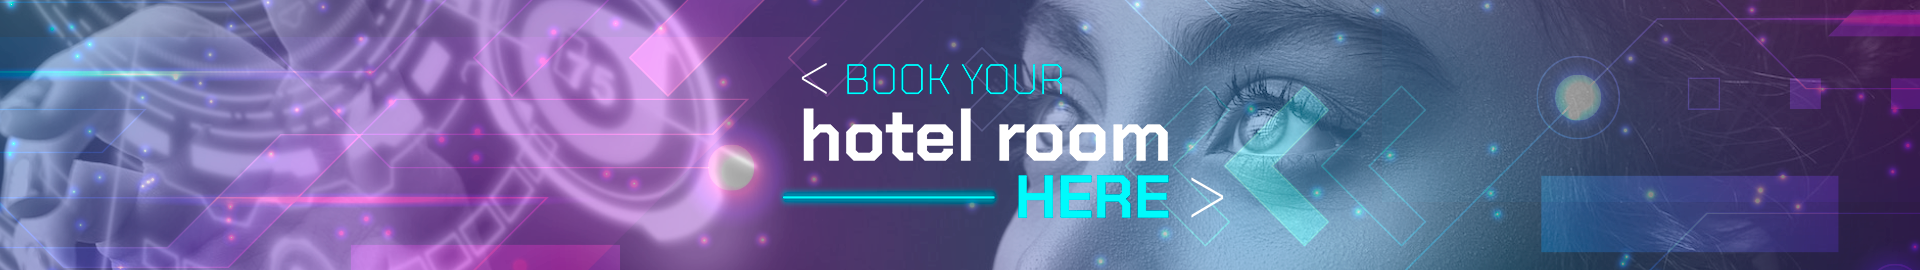 Book your hotel room here